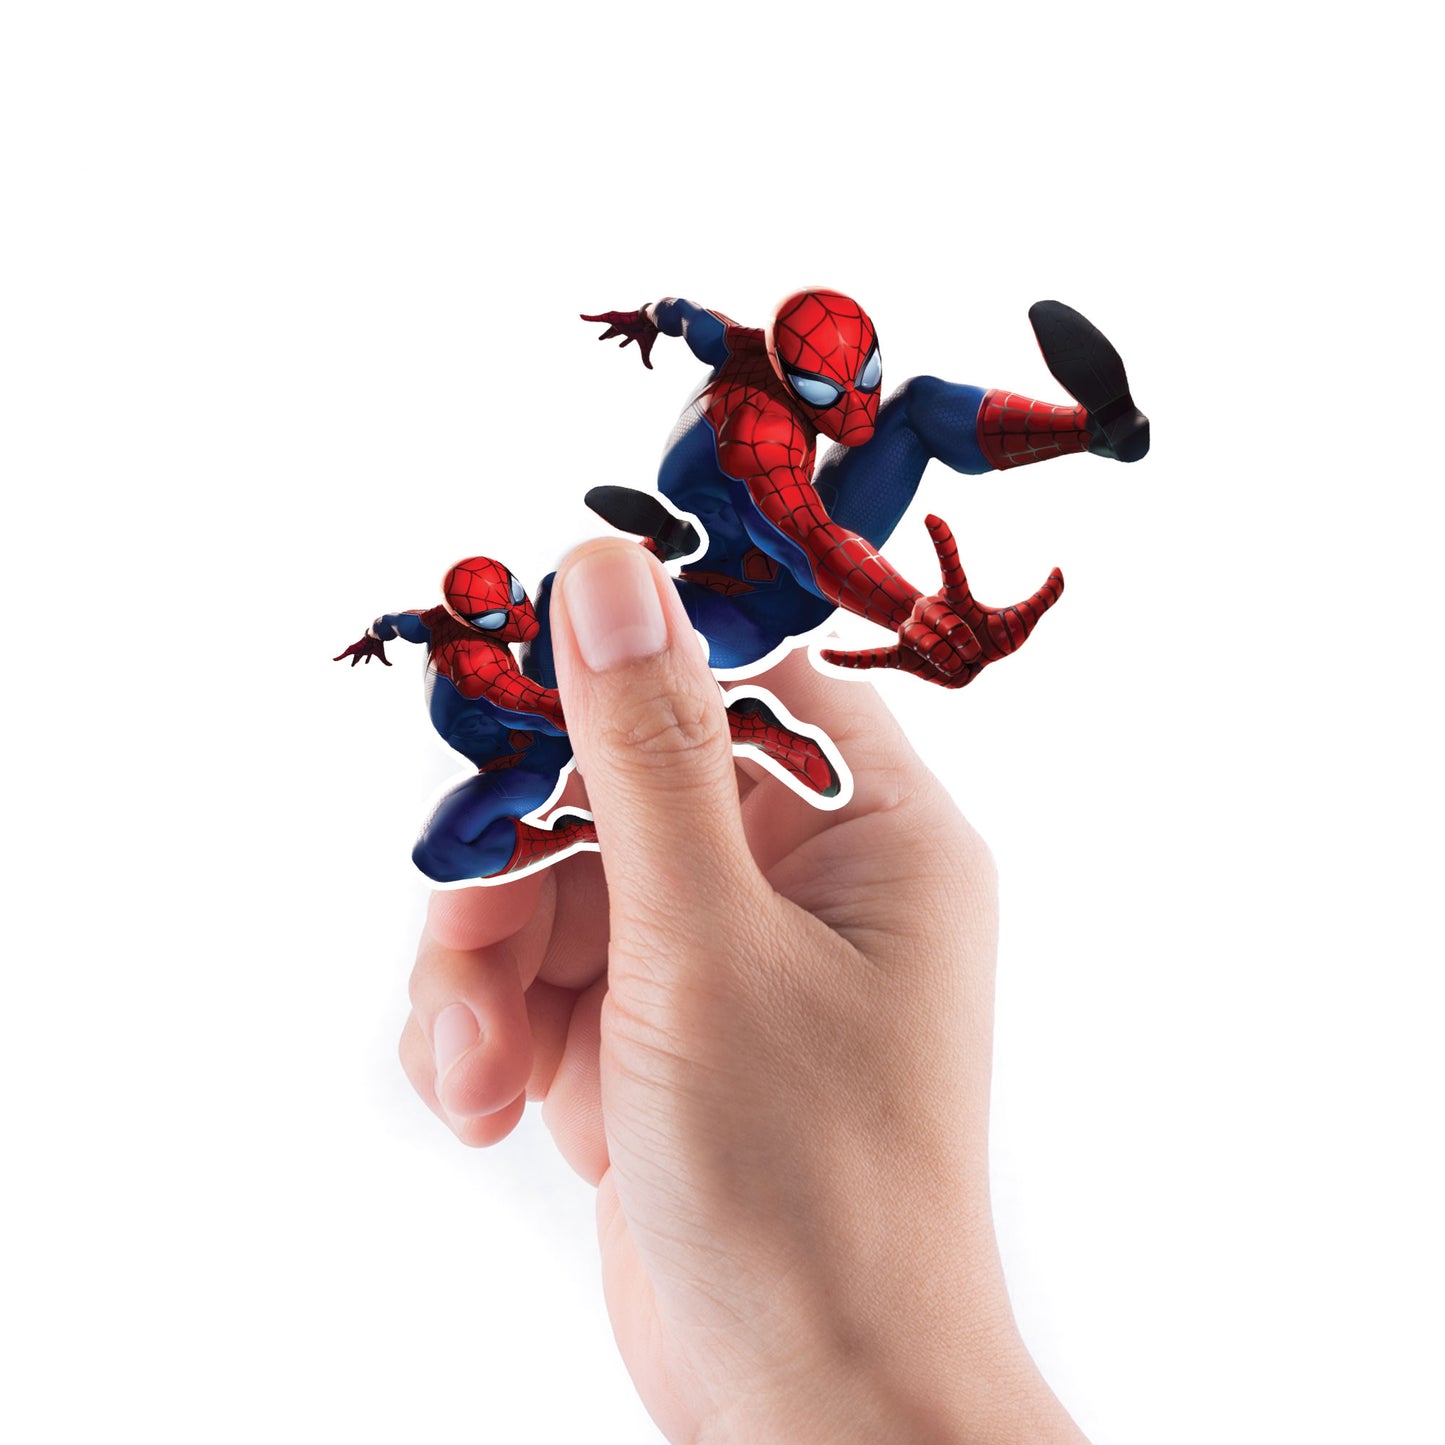 Sheet of 5 -Spider-Man:  Jumping MINI        - Officially Licensed Marvel Removable    Adhesive Decal